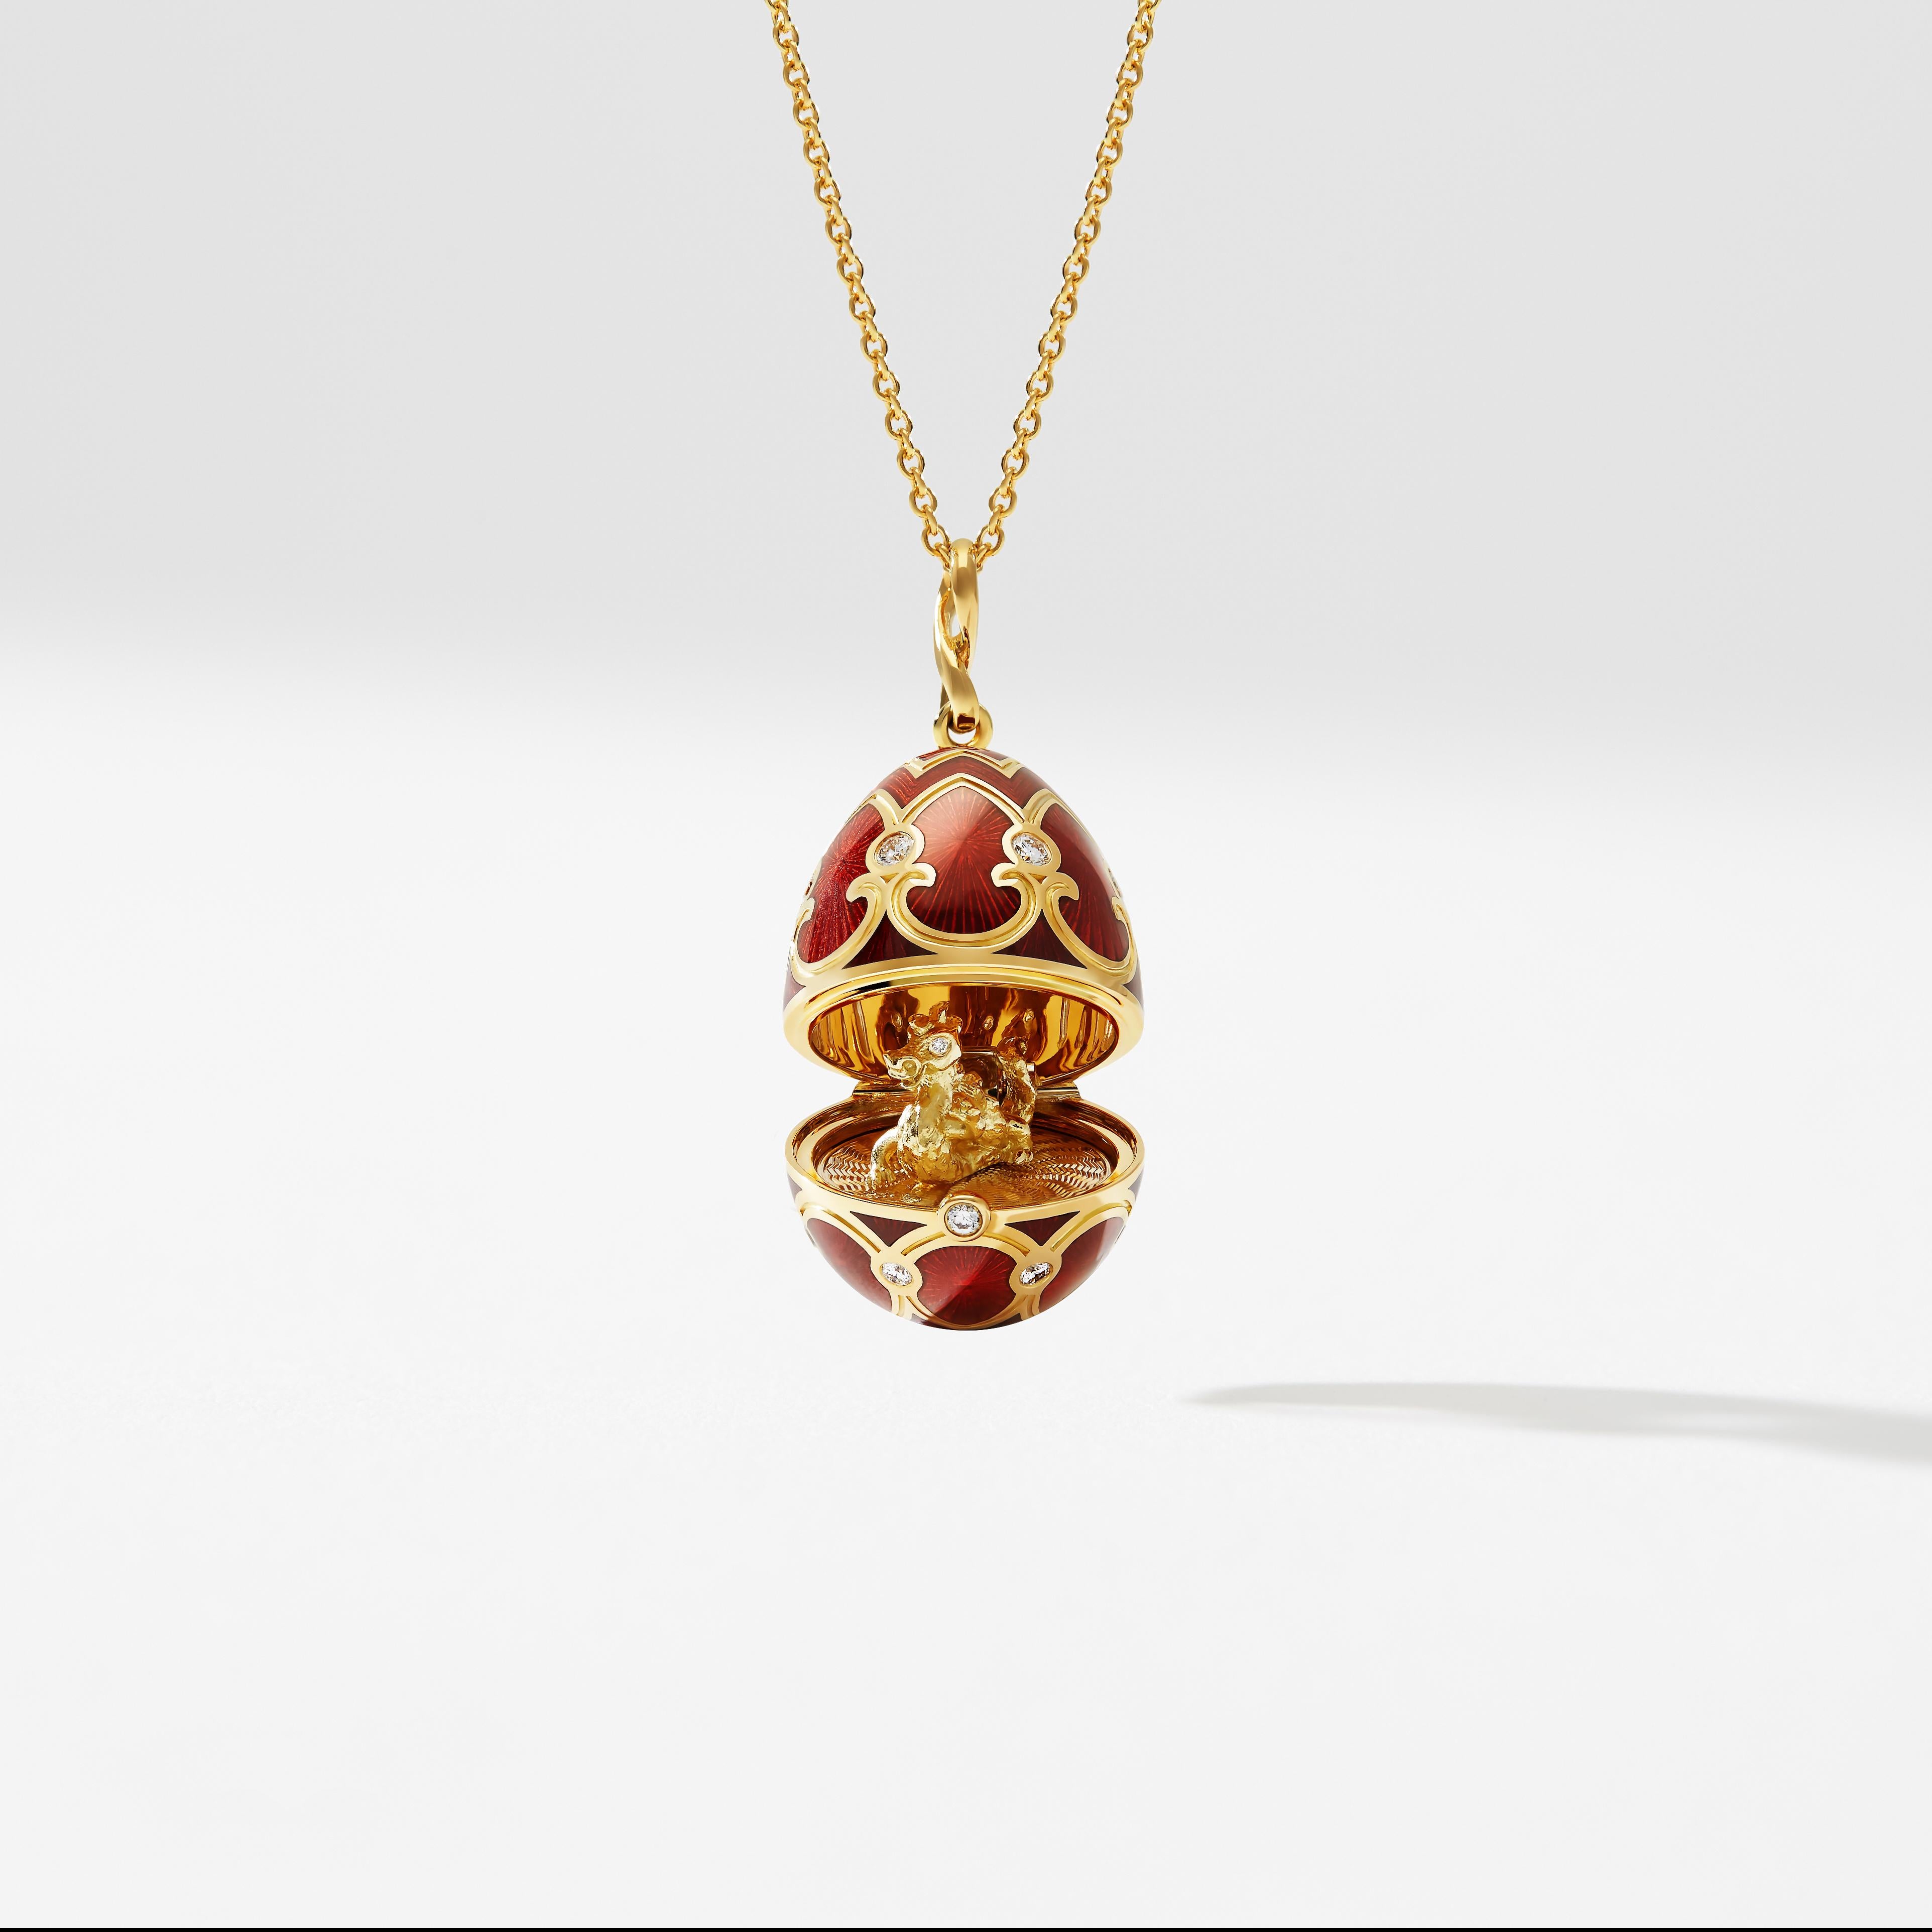 The Heritage Yellow Gold Diamond & Red Guilloché Enamel Year Of The Dragon Surprise Locket features red guilloché enamel and round white diamonds. The 22mm 18 karat yellow gold locket opens to reveal an 18 karat yellow gold dragon with diamond eyes,